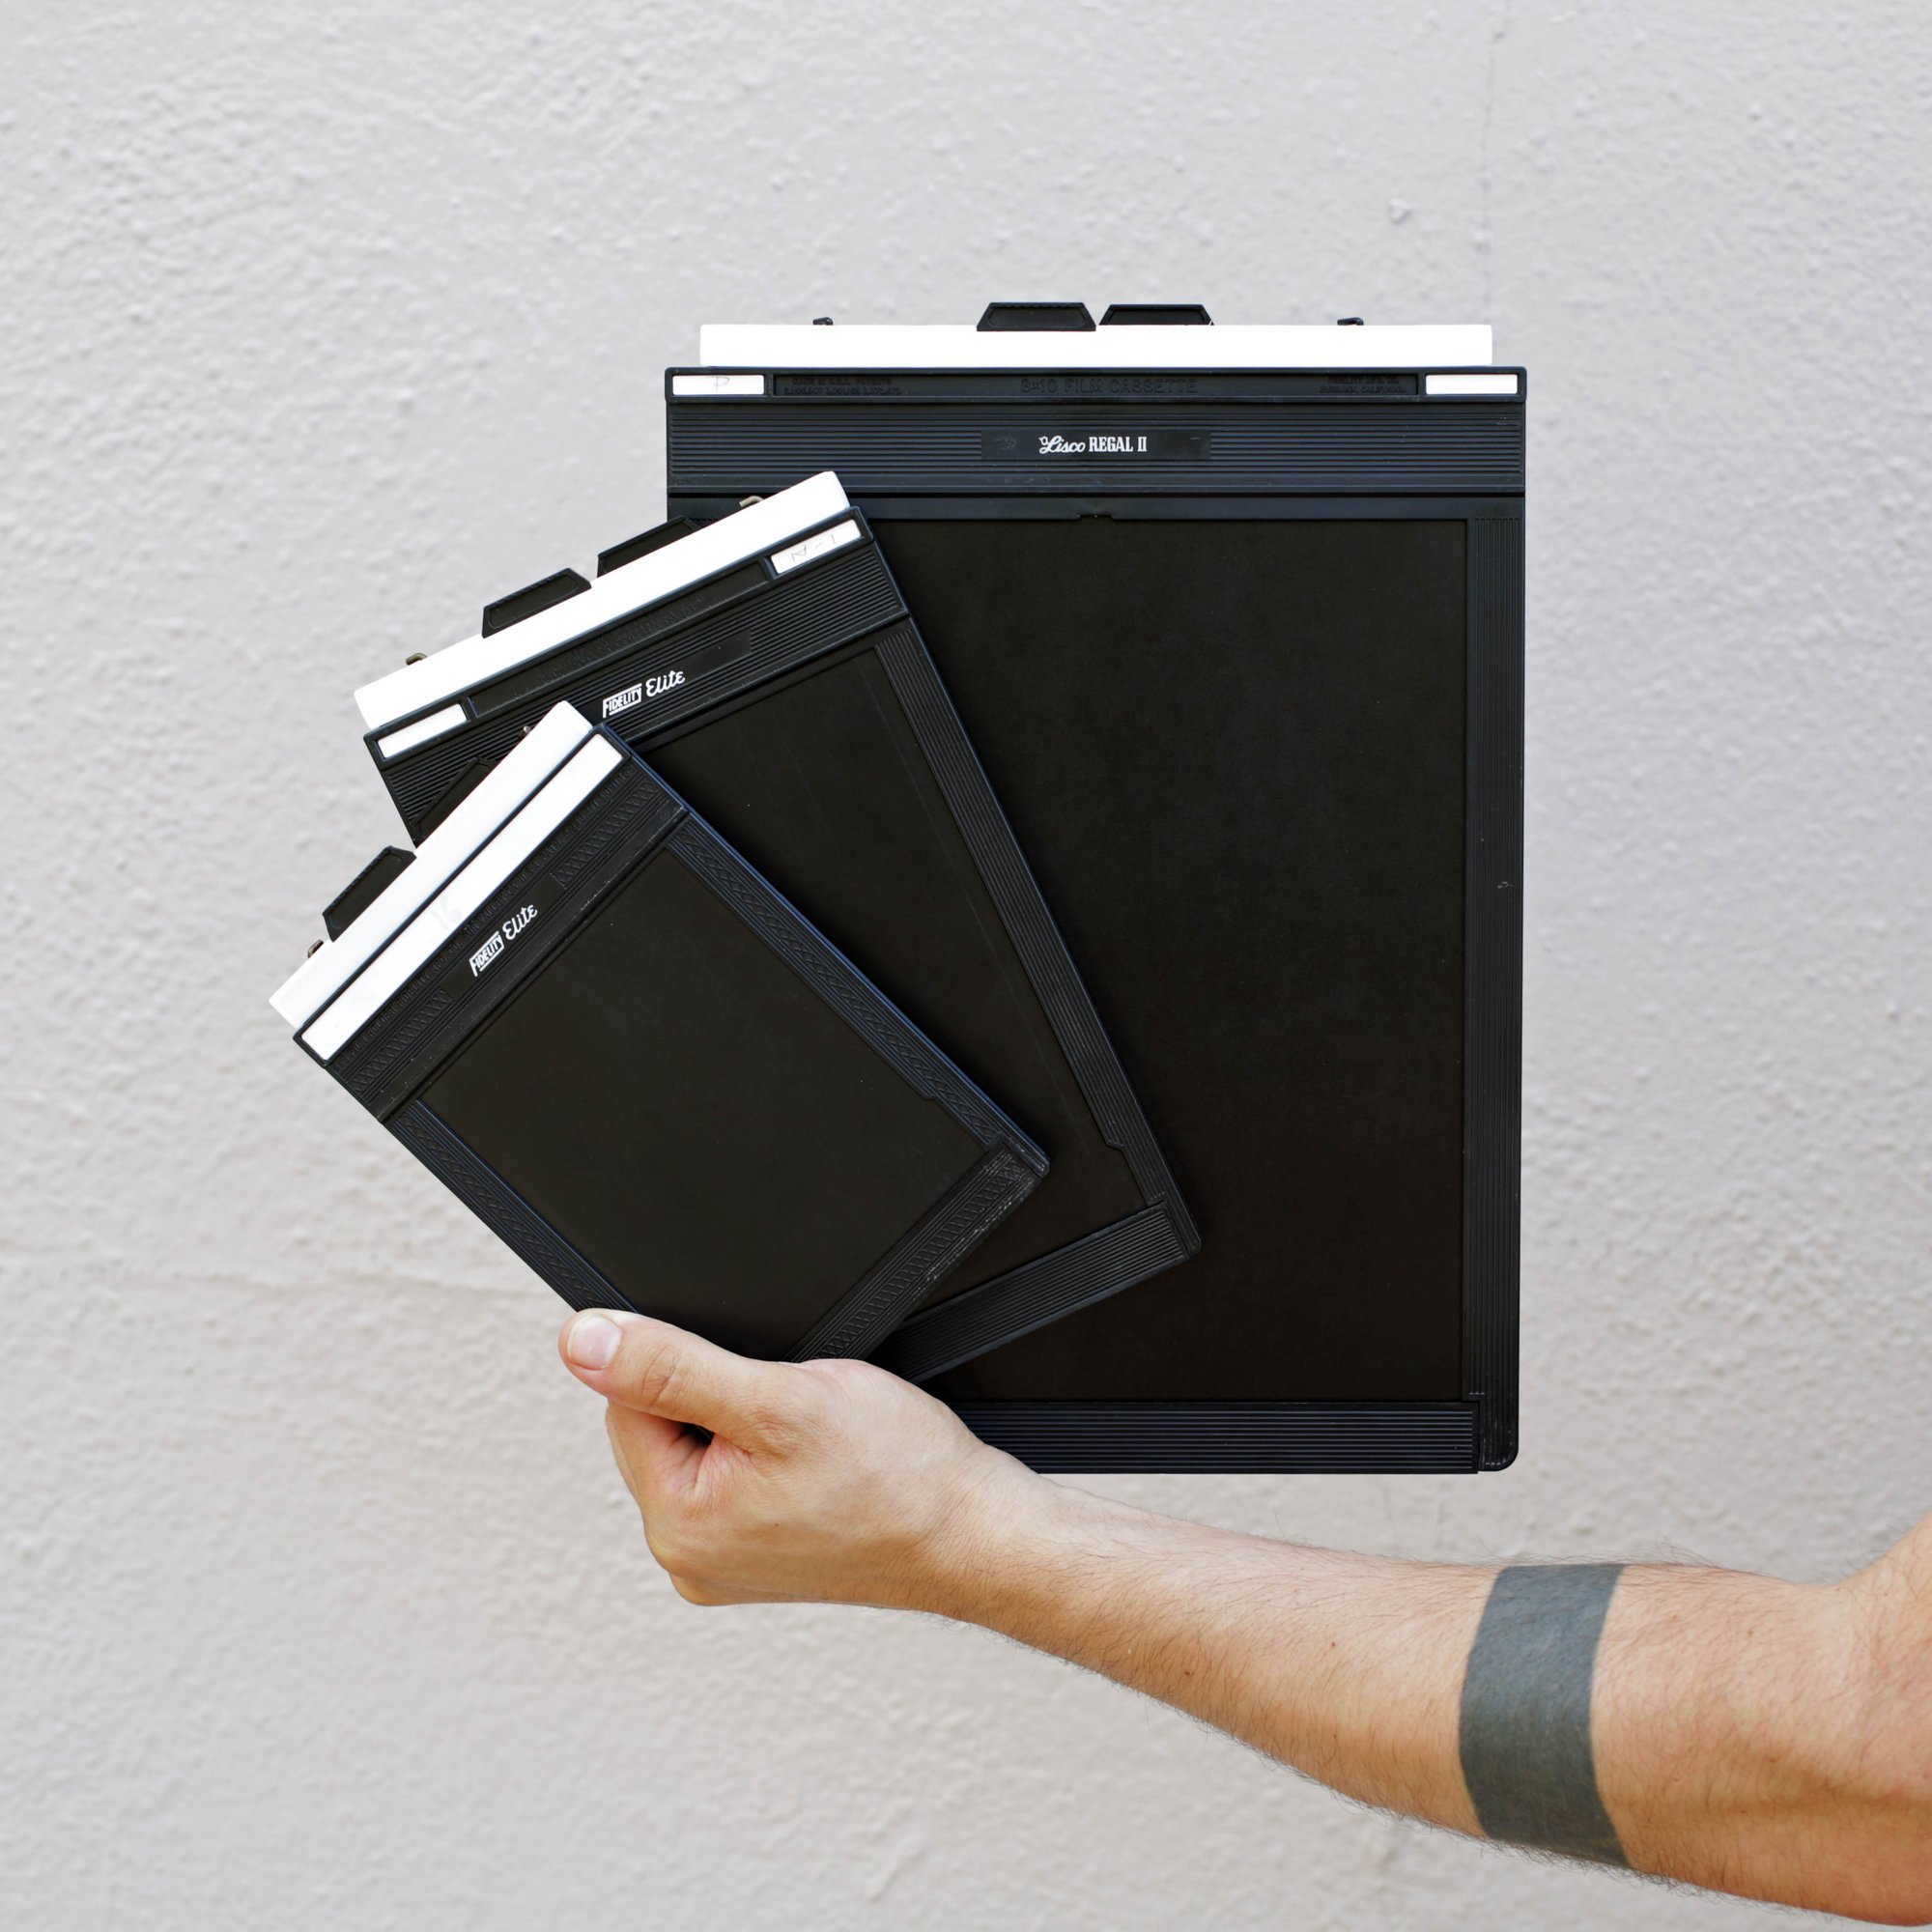 Sheet Film Holders for Large Format Cameras (4X5, 5X7, 8X10)